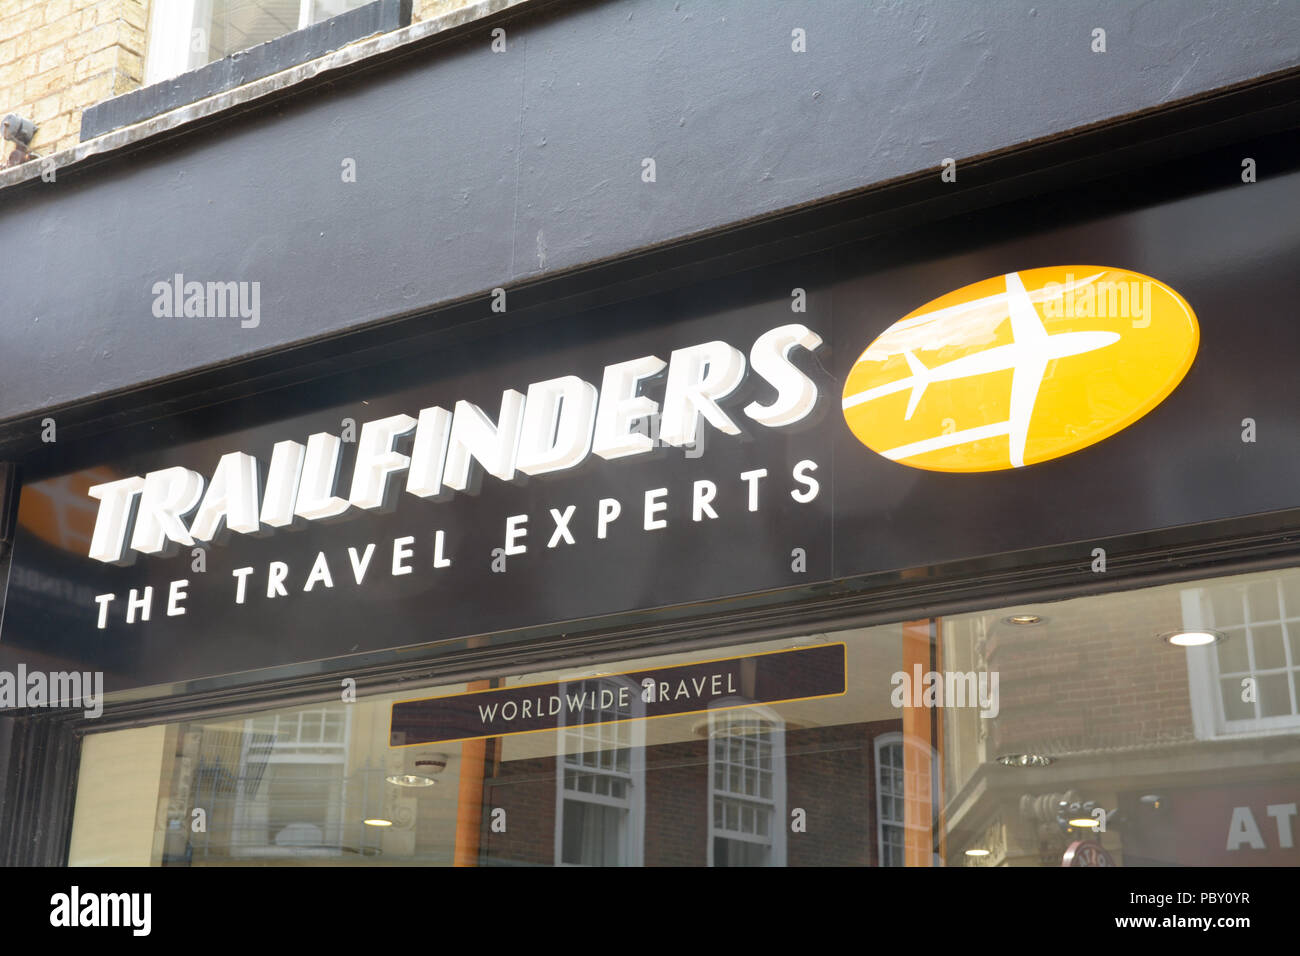 Trailfinders - The Travel Experts branch in Cambridge, Cambridgeshire, England Stock Photo